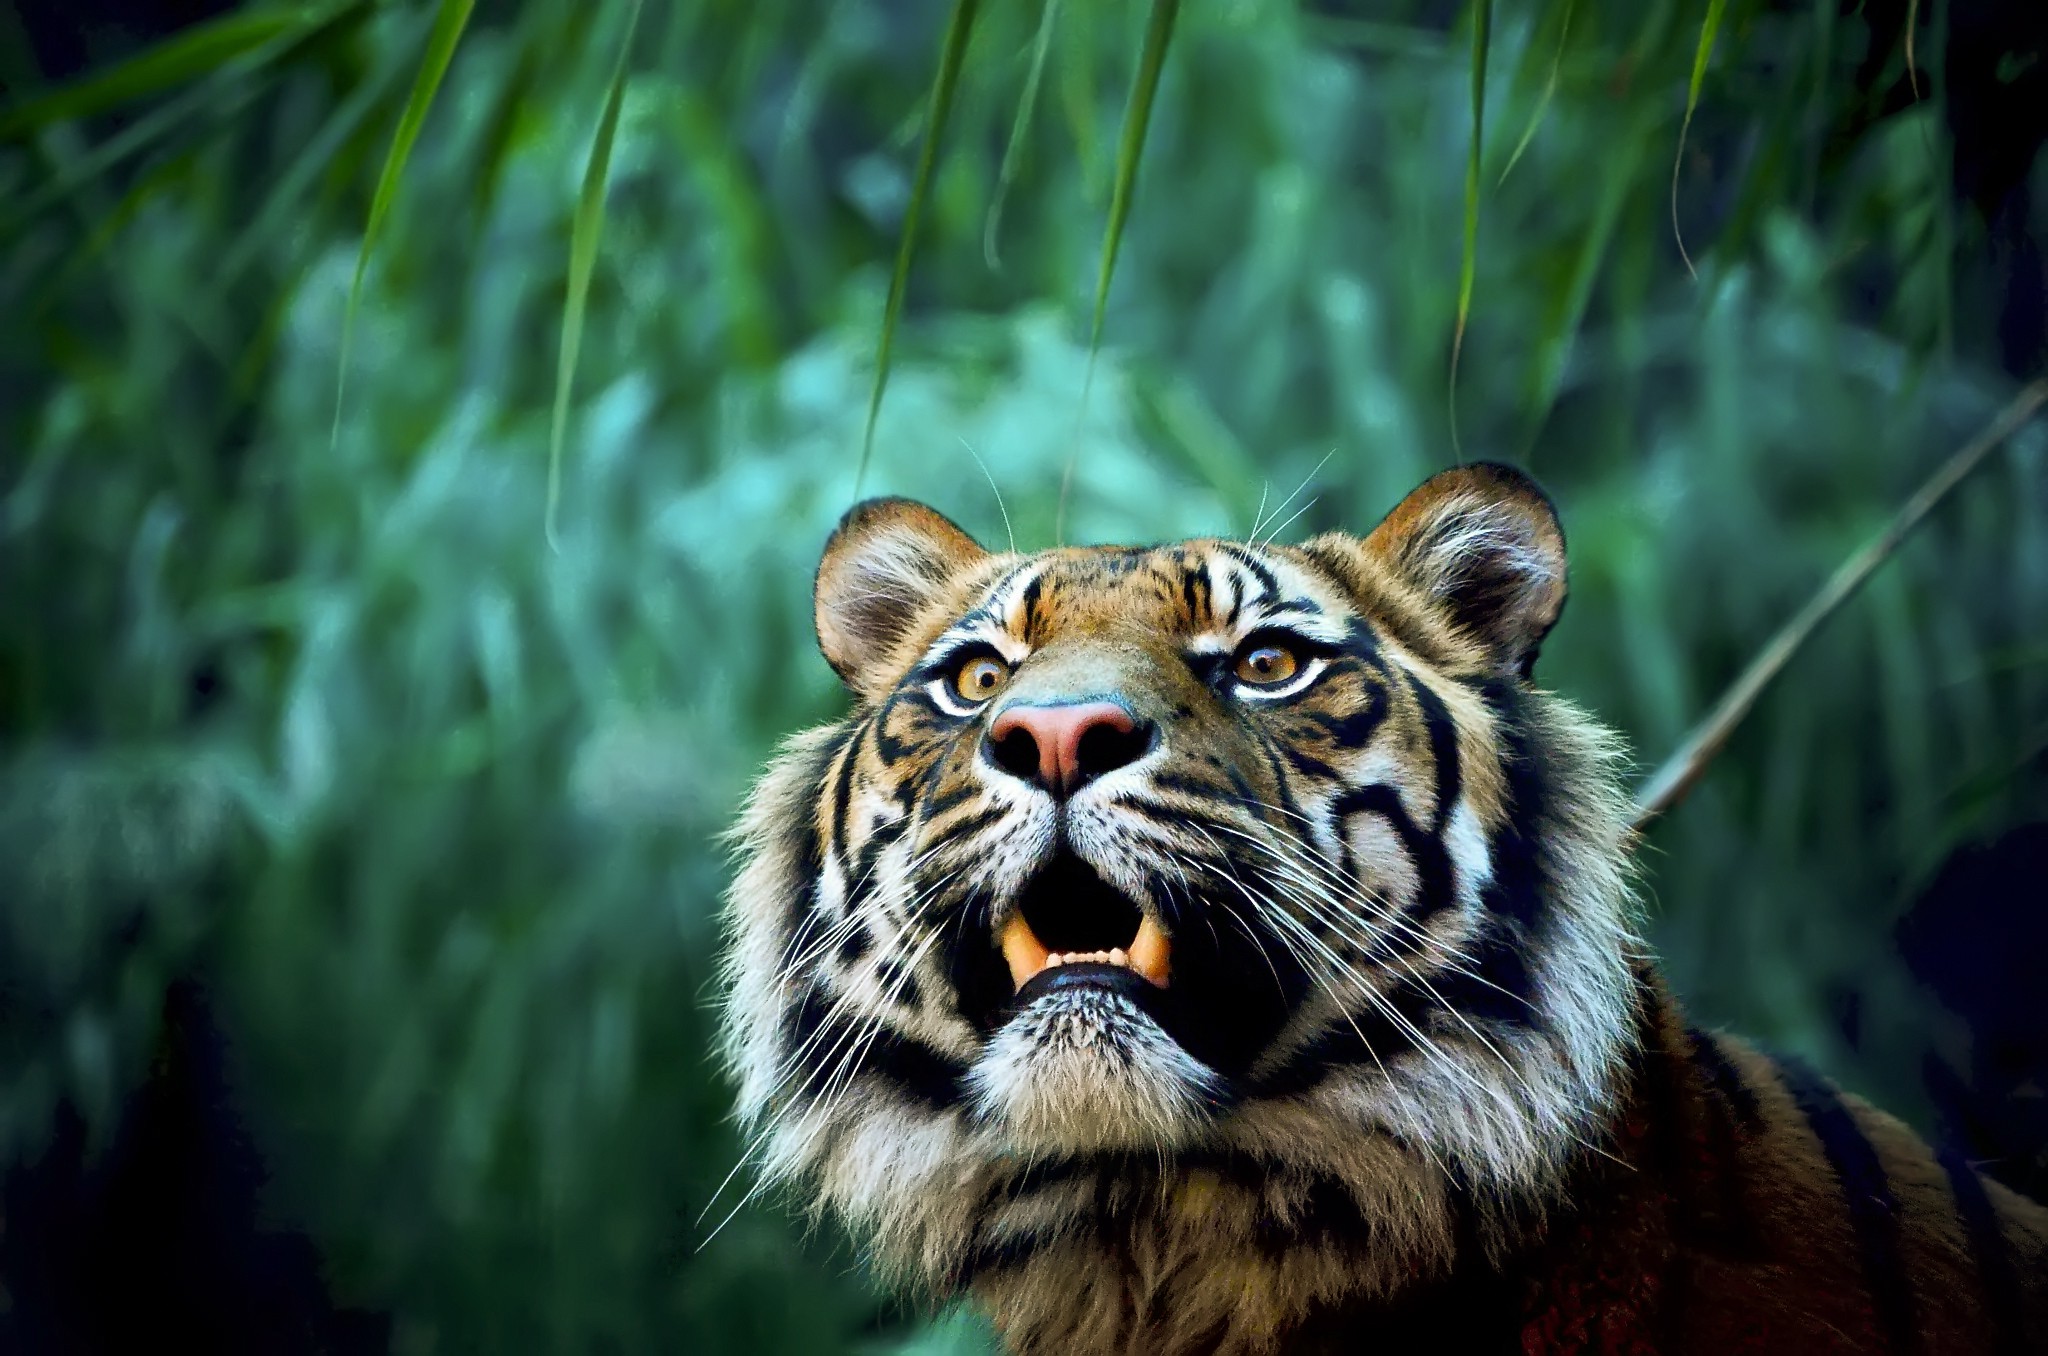  animals  Nature  Tiger Wallpapers  HD  Desktop  and Mobile 